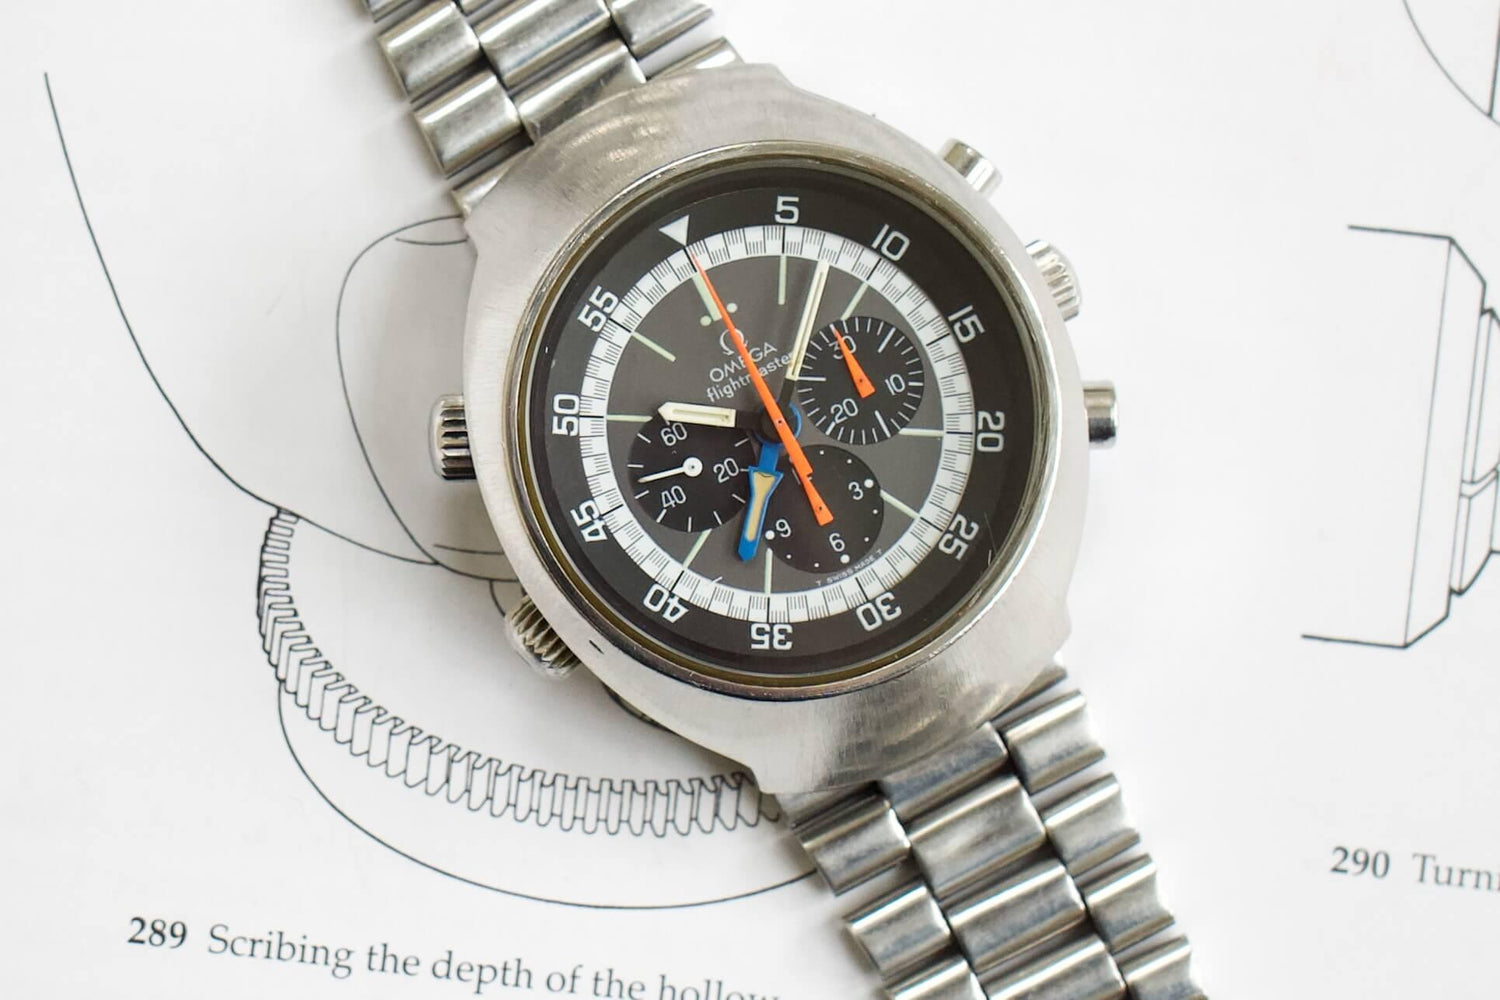 SOLDOUT: Omega FlightMaster Chronograph 1970s Vintage Reference 145.036 One Owner PAPERS - WearingTime Luxury Watches